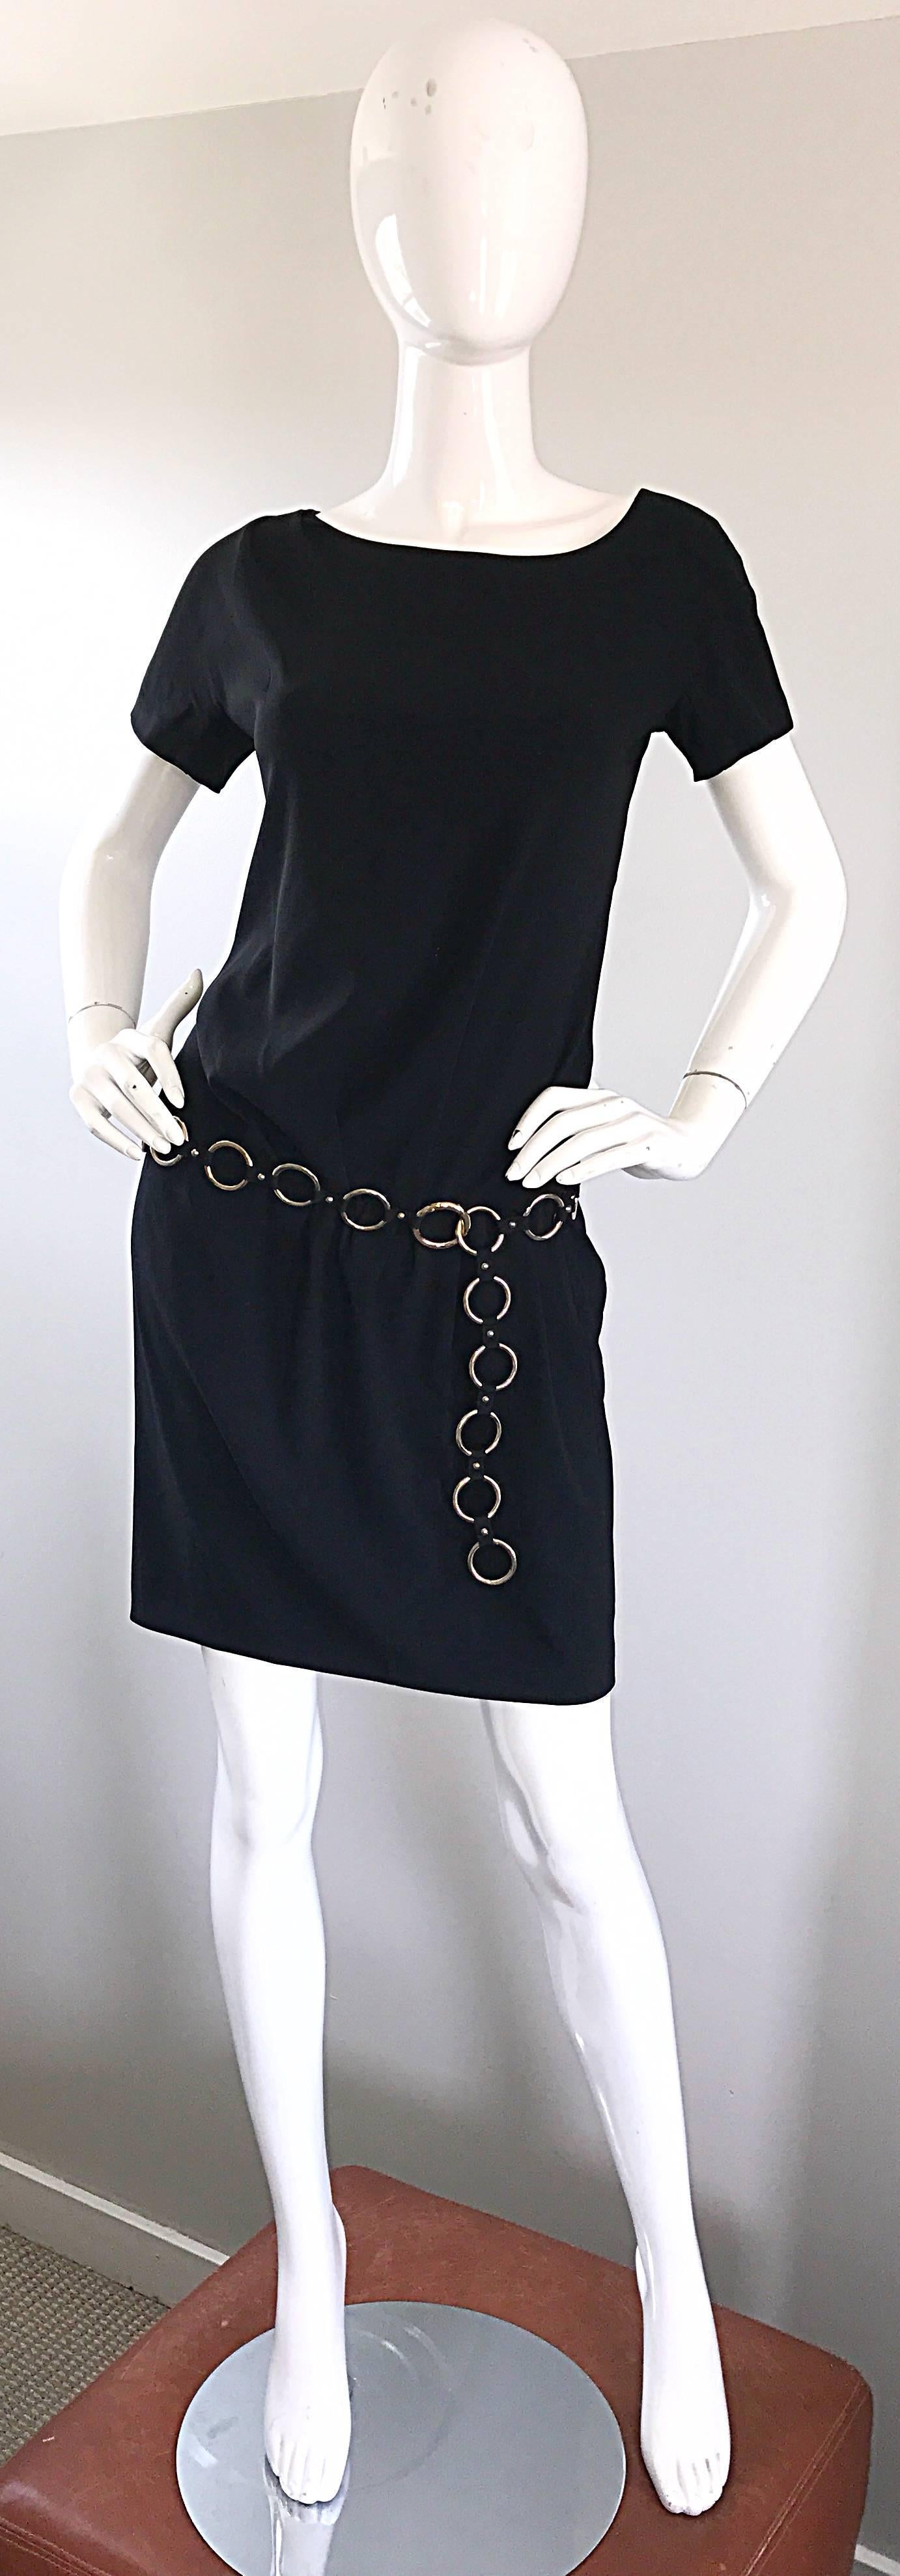 1990s Moschino Cheap & Chic Black Silver Chain Loop Belt Vintage Dress Size 6  For Sale 2